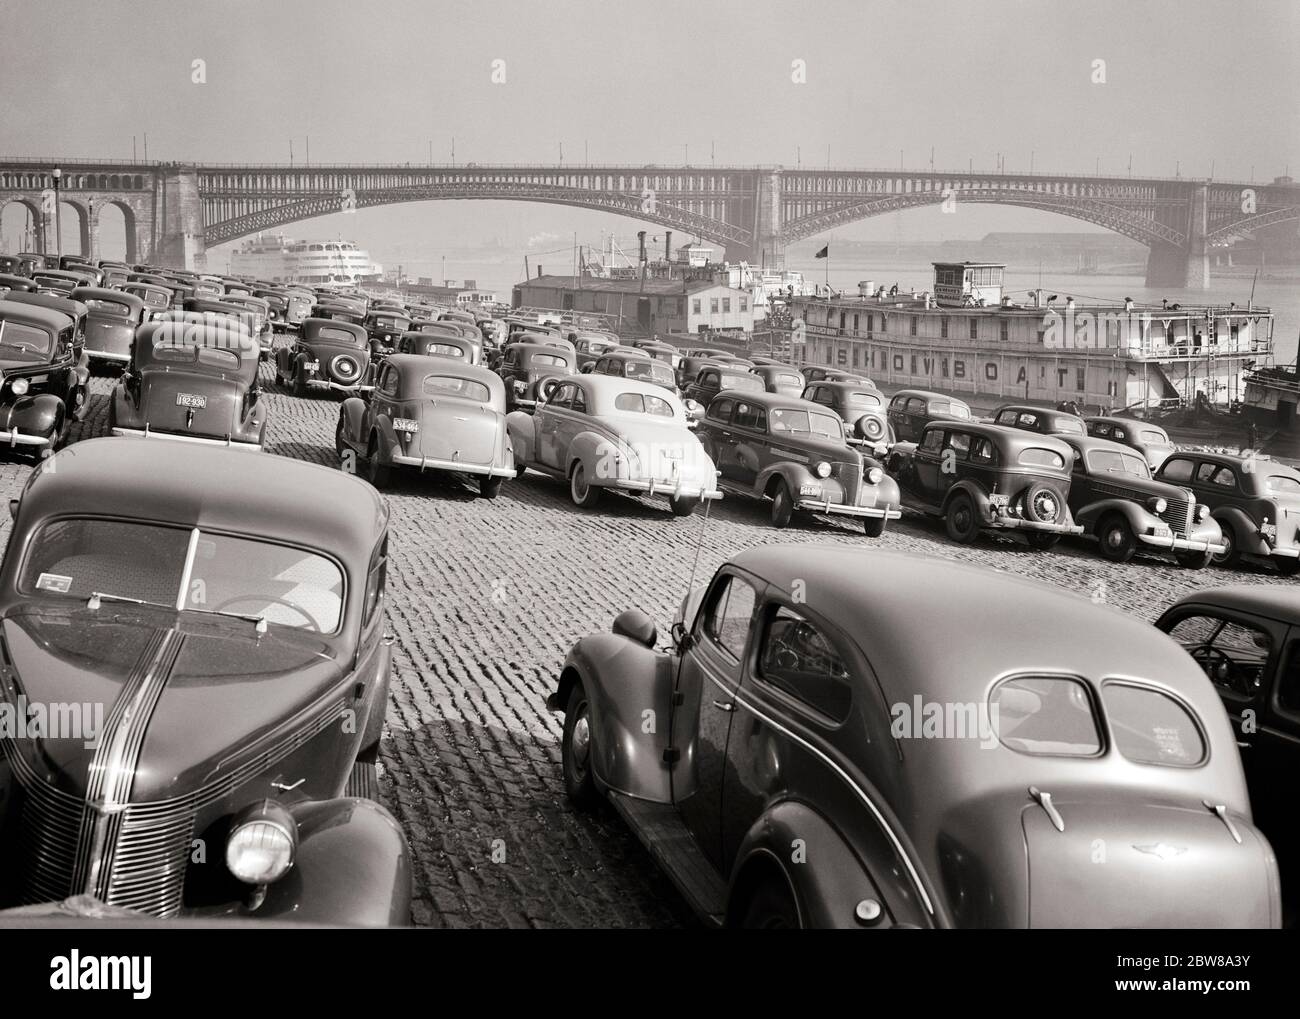 1930s 1940s CARS PARKED ON THE LEVEE LOT AND A SHOW BOAT AND SS ADMIRAL DOCKED ON THE MISSISSIPPI RIVER ST. LOUIS MISSOURI  - r1885 HAR001 HARS WIDE ANGLE HIGH ANGLE LOUIS AND AUTOS EXCITEMENT MISSOURI PROGRESS RECREATION STEAM POWERED AT ON OCCUPATIONS CONCEPTUAL DOCKED AUTOMOBILES ST. VEHICLES LEVEE SS SS ADMIRAL TOWBOAT ADMIRAL BLACK AND WHITE HAR001 MIDWEST MIDWESTERN MISSISSIPPI MISSISSIPPI RIVER MO MOORED OLD FASHIONED PADDLE WHEEL ST. LOUIS Stock Photo